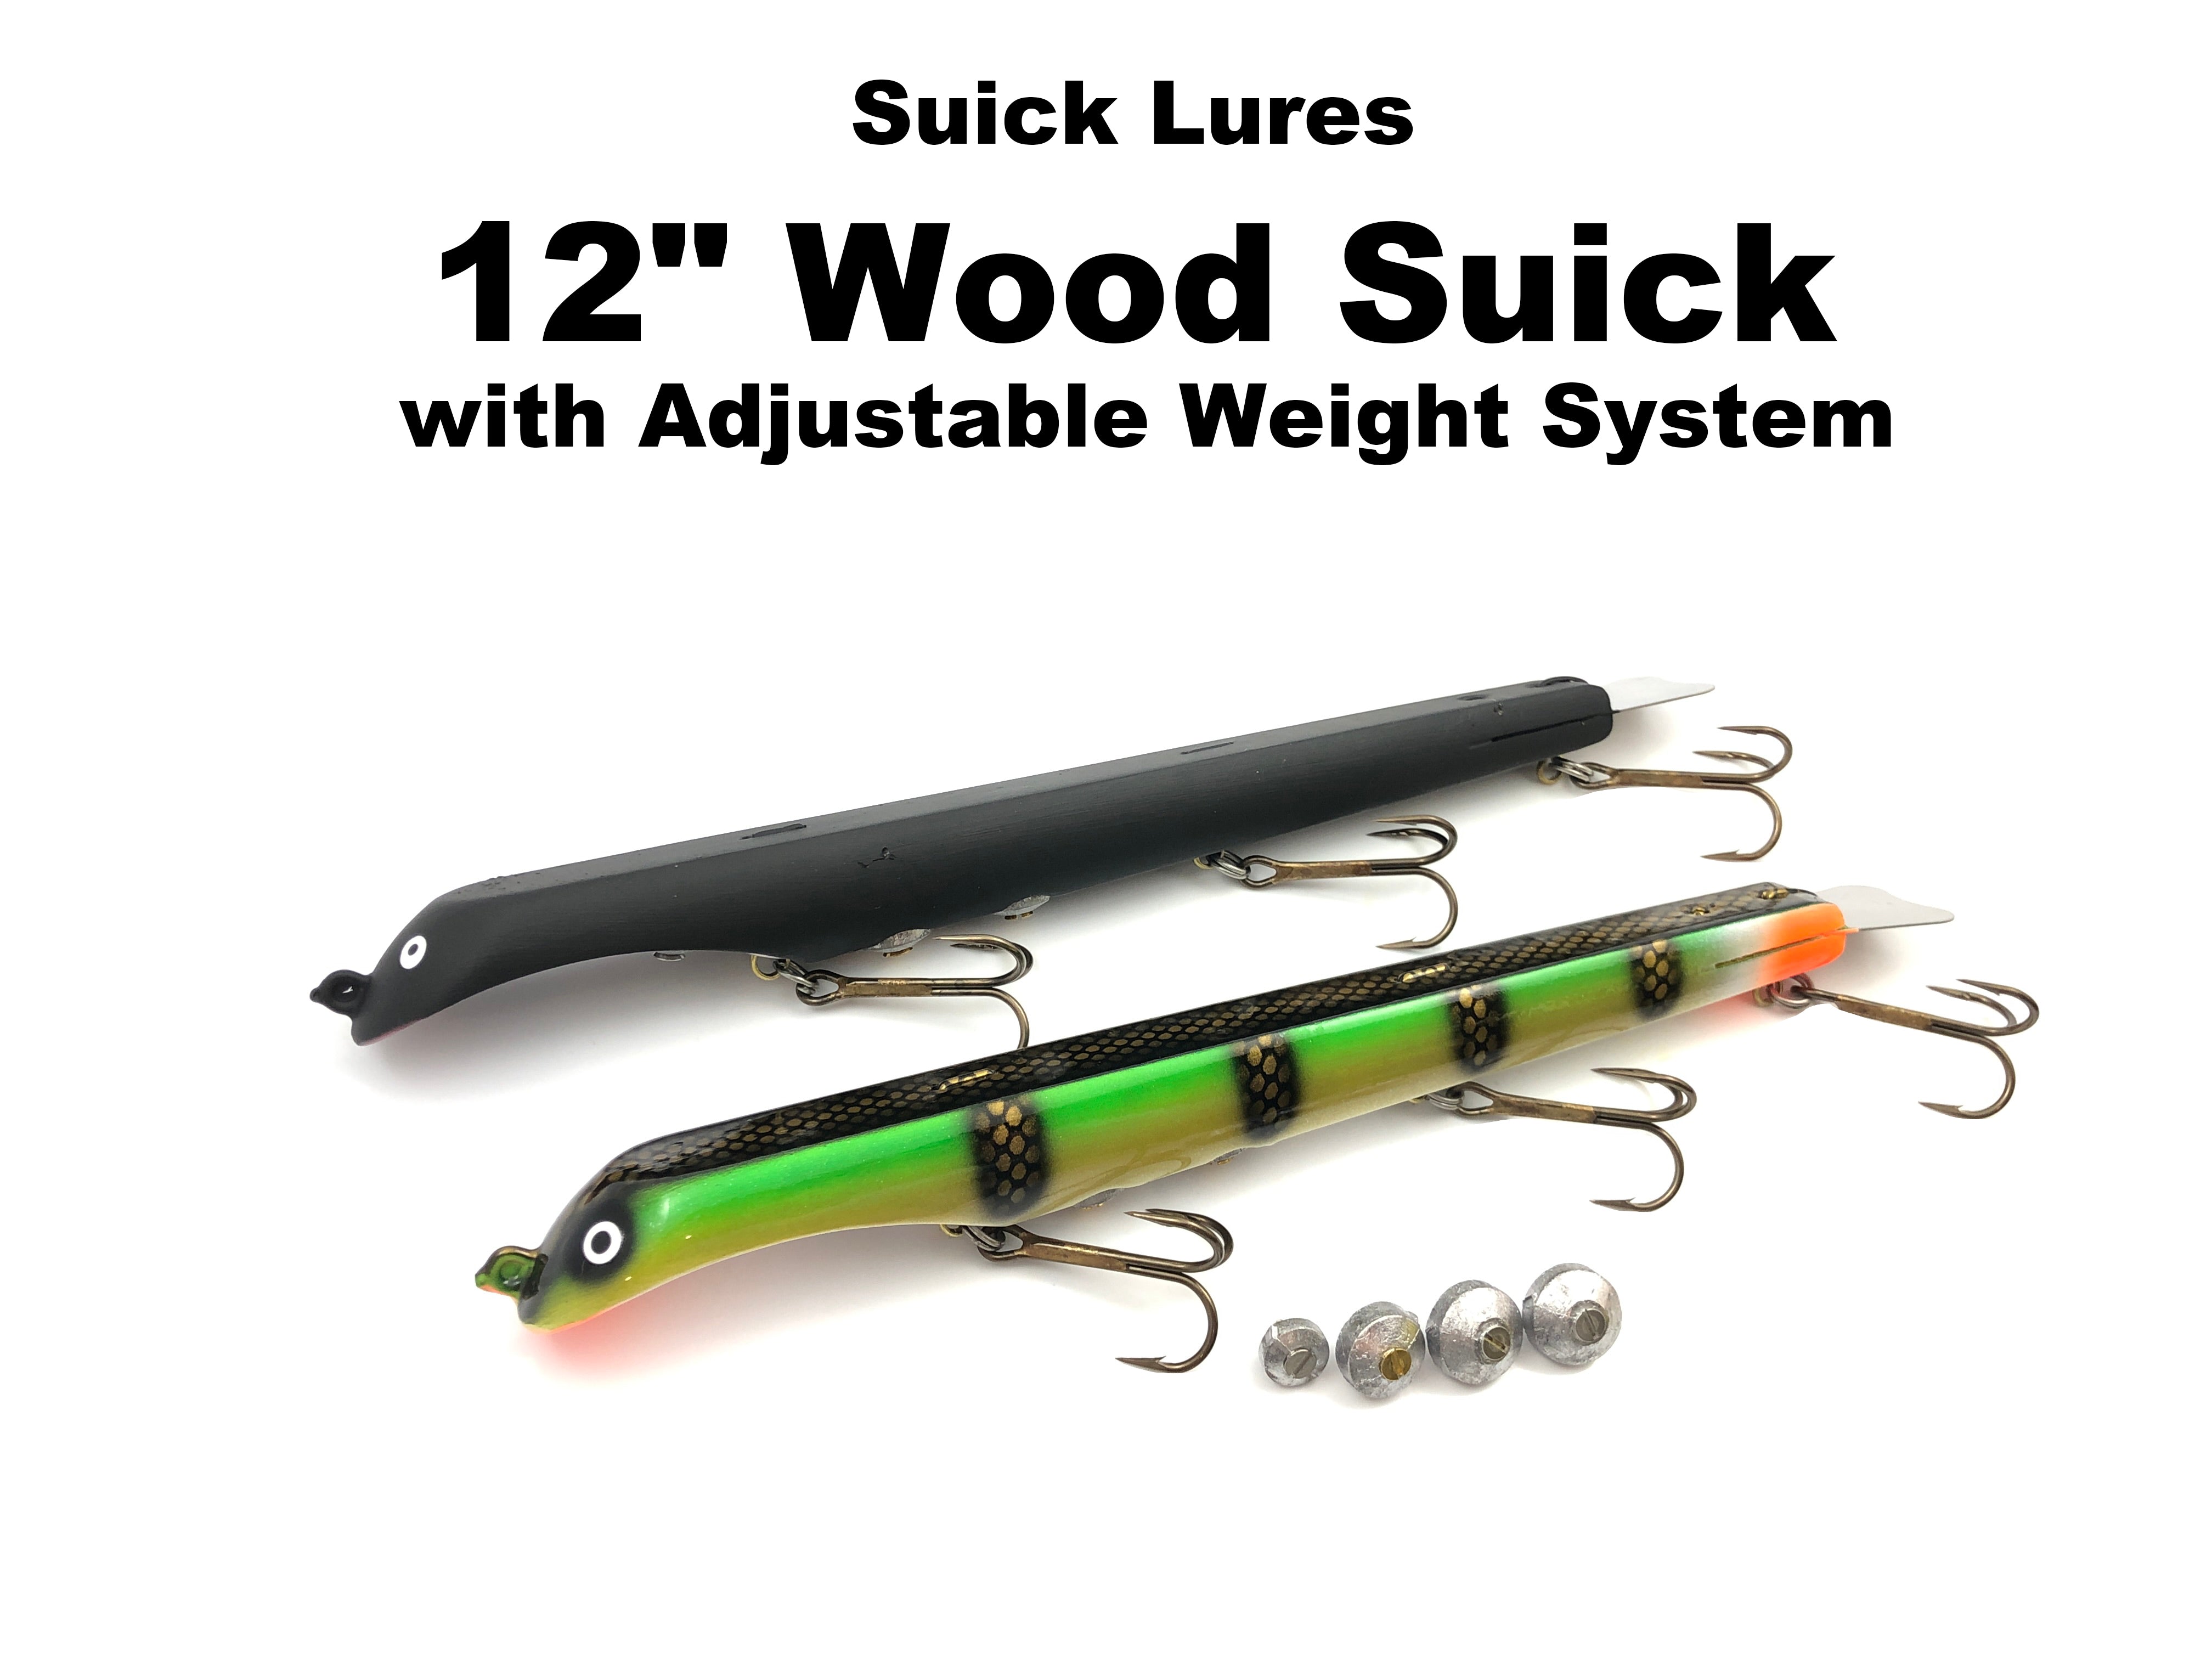 Suick Lures 12 Wood Suick with Adjustable Weight System – Team